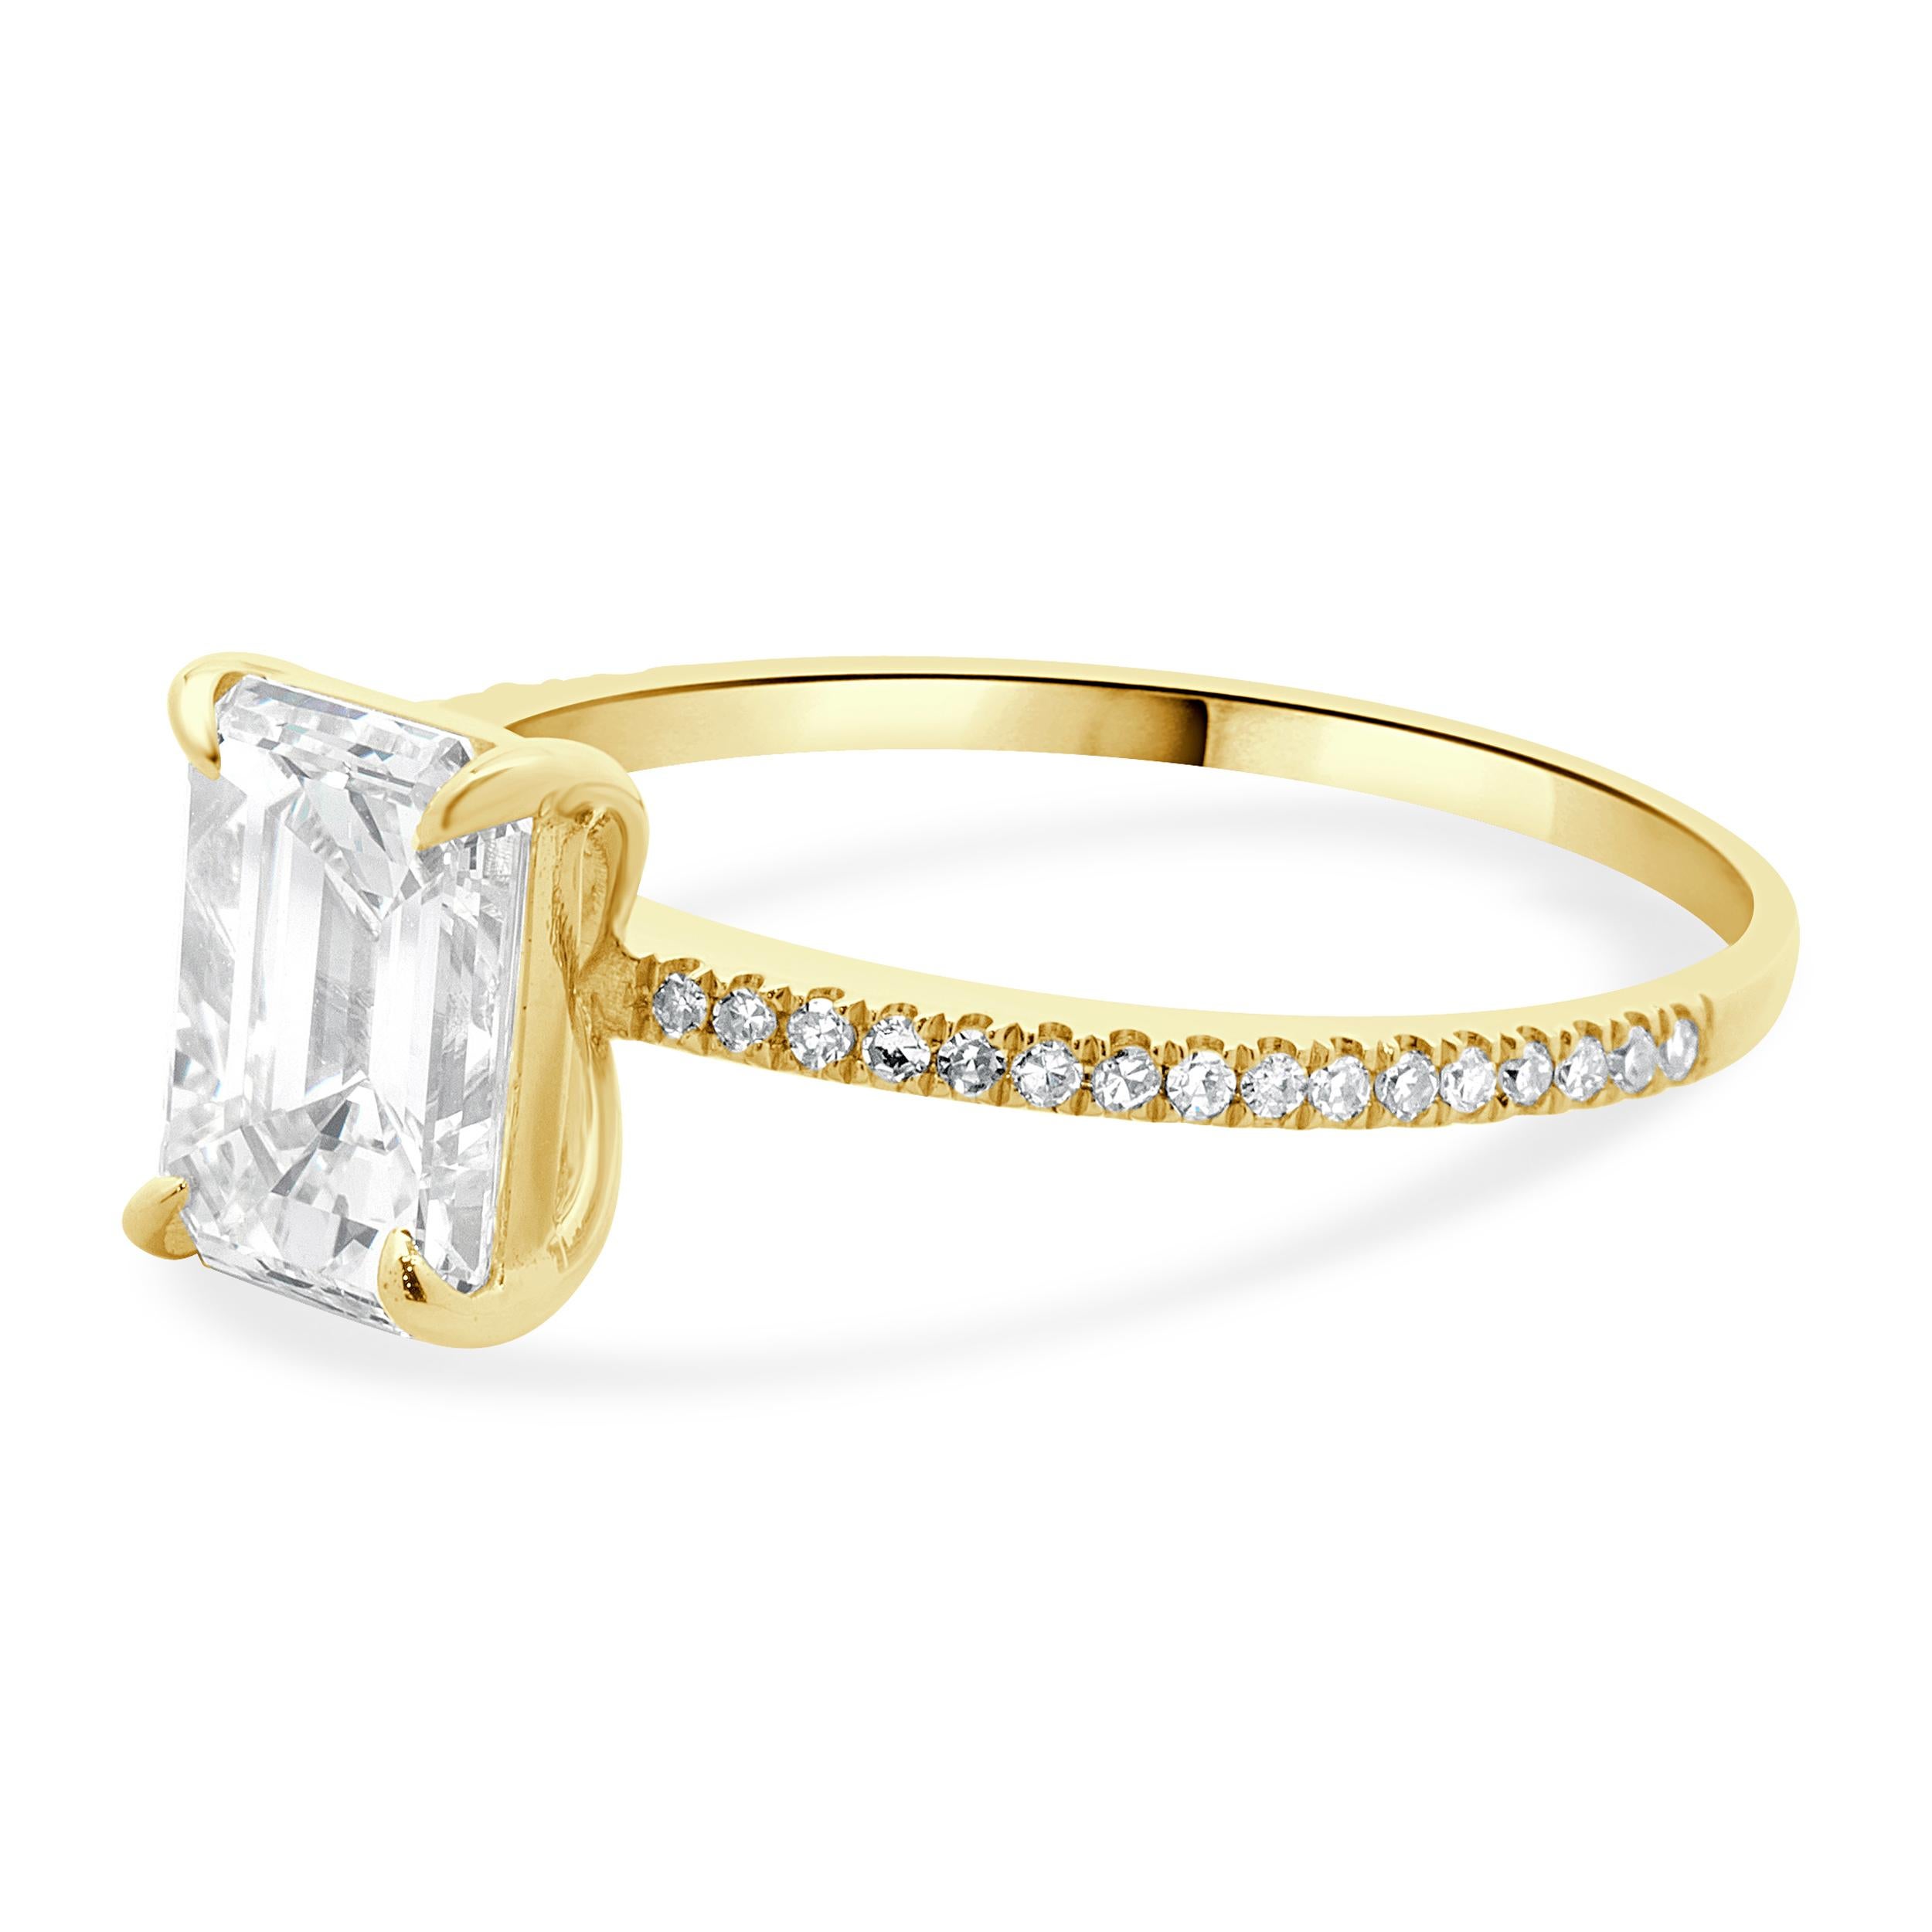 Designer: custom
Material: 14K yellow gold
Diamond: 1 emerald cut = 1.82ct
Color: J
Clarity: VS2
GIA: 6224995343
Diamond: 32 round brilliant cut = 0.16cttw
Color: H
Clarity: SI1
Dimensions: ring top measures 8.5mm wide
Ring Size: 6.5 (complimentary